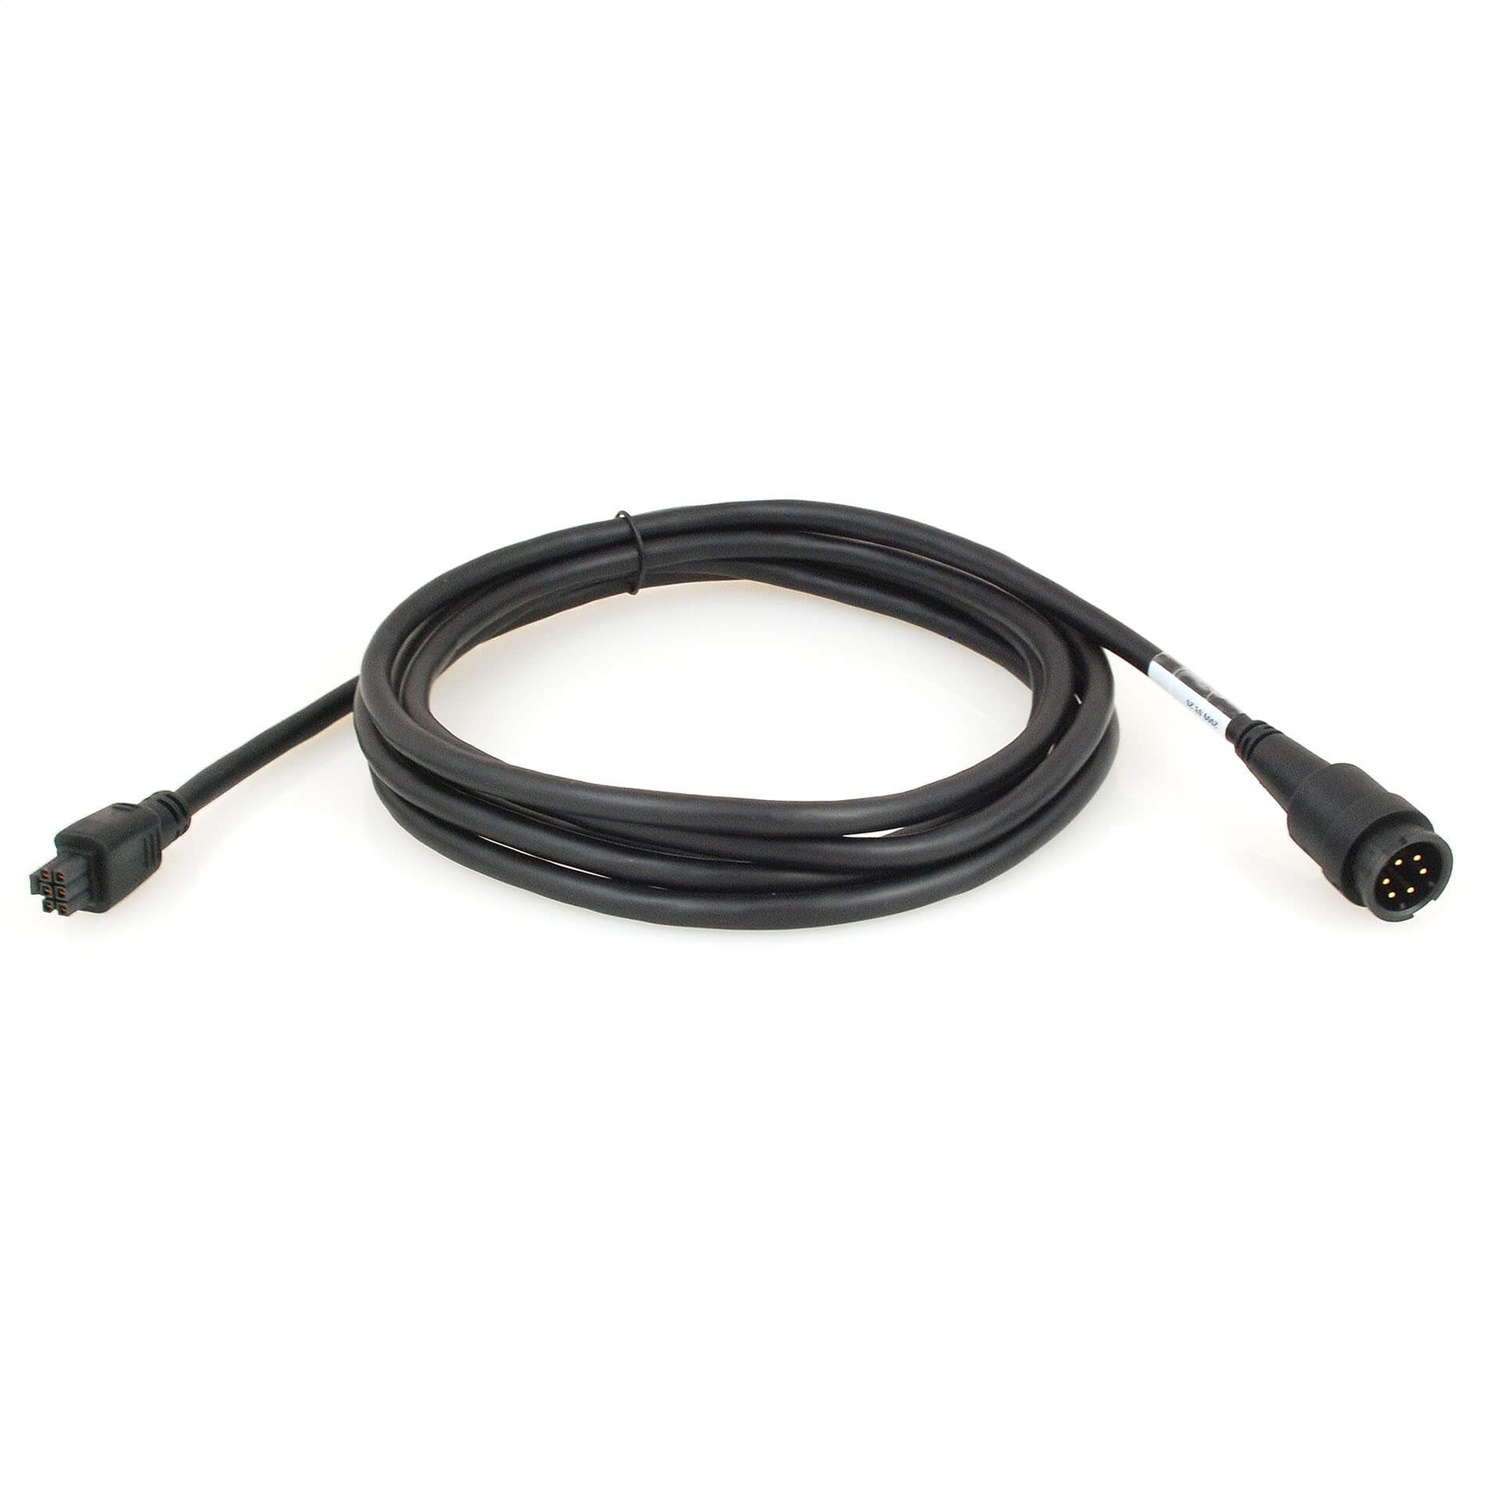 DiabloSport 98602 Accessory System Starter Kit Cable